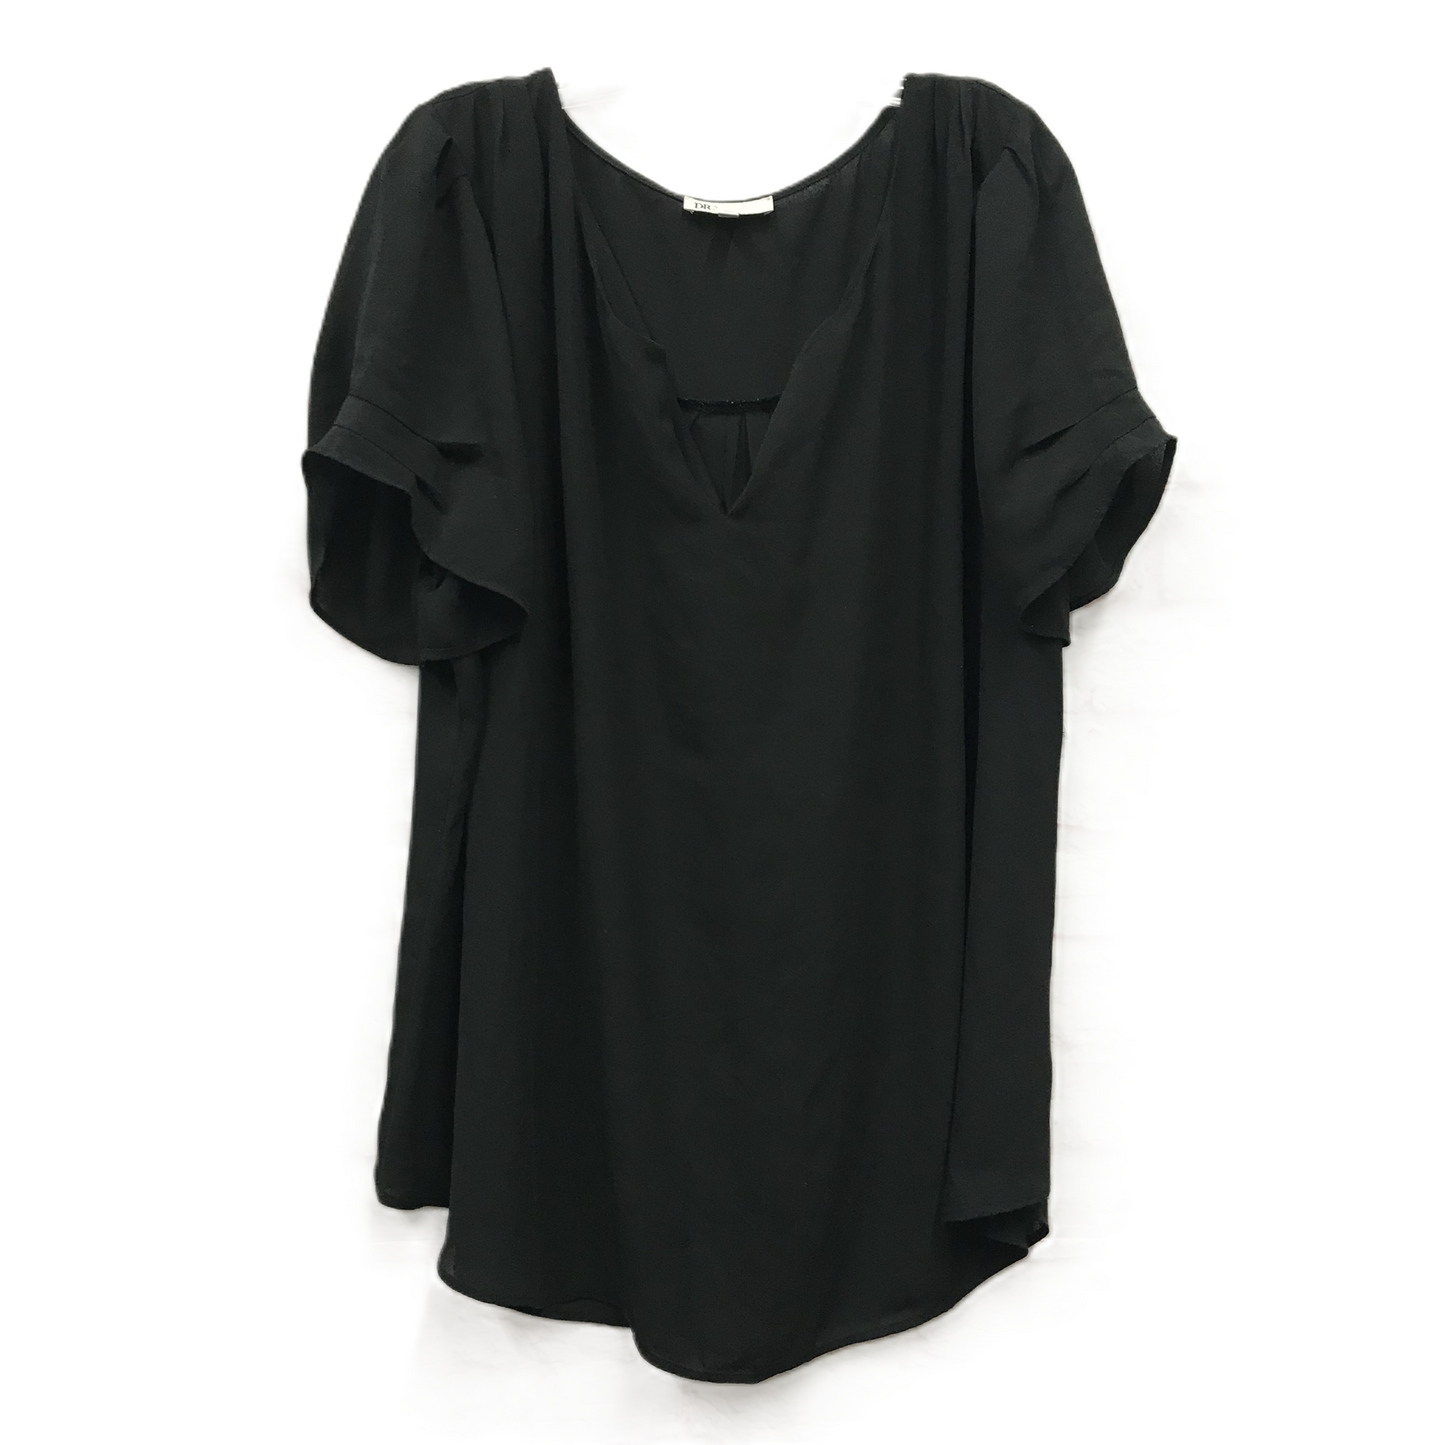 Black Top Short Sleeve By Dr2, Size: 1x